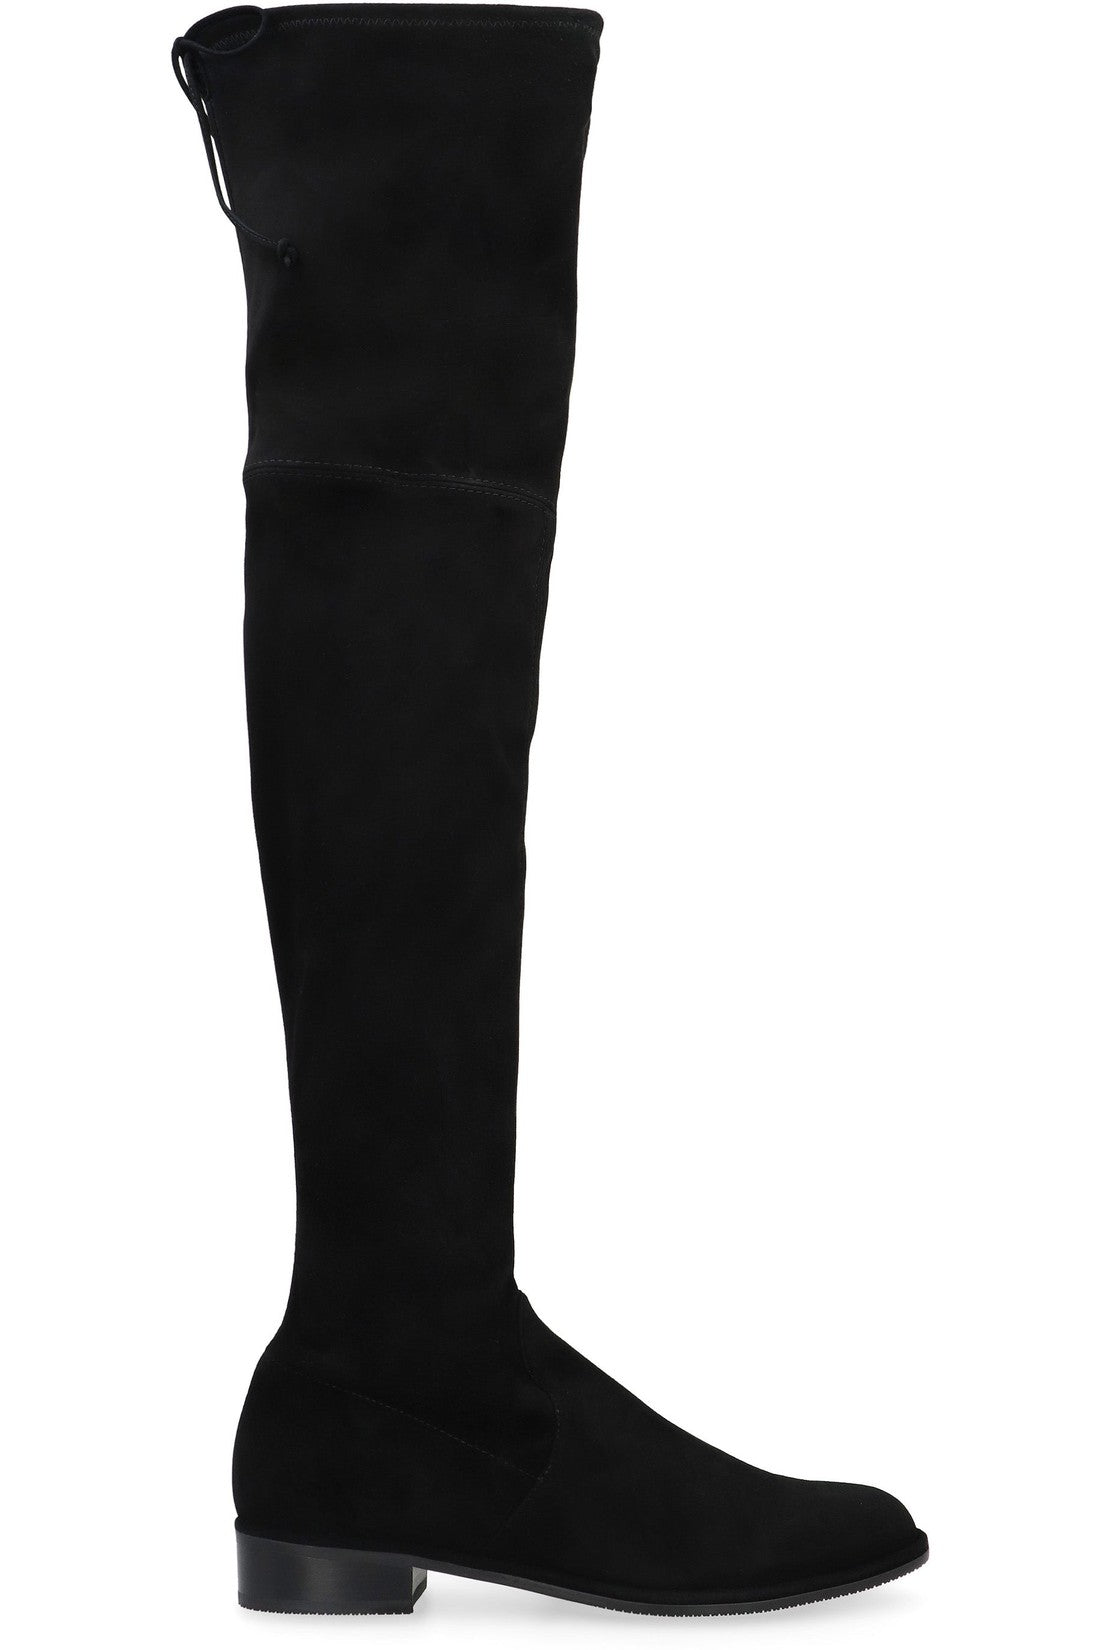 Stuart Weitzman-OUTLET-SALE-Lowland Stretch suede over the knee boots-ARCHIVIST